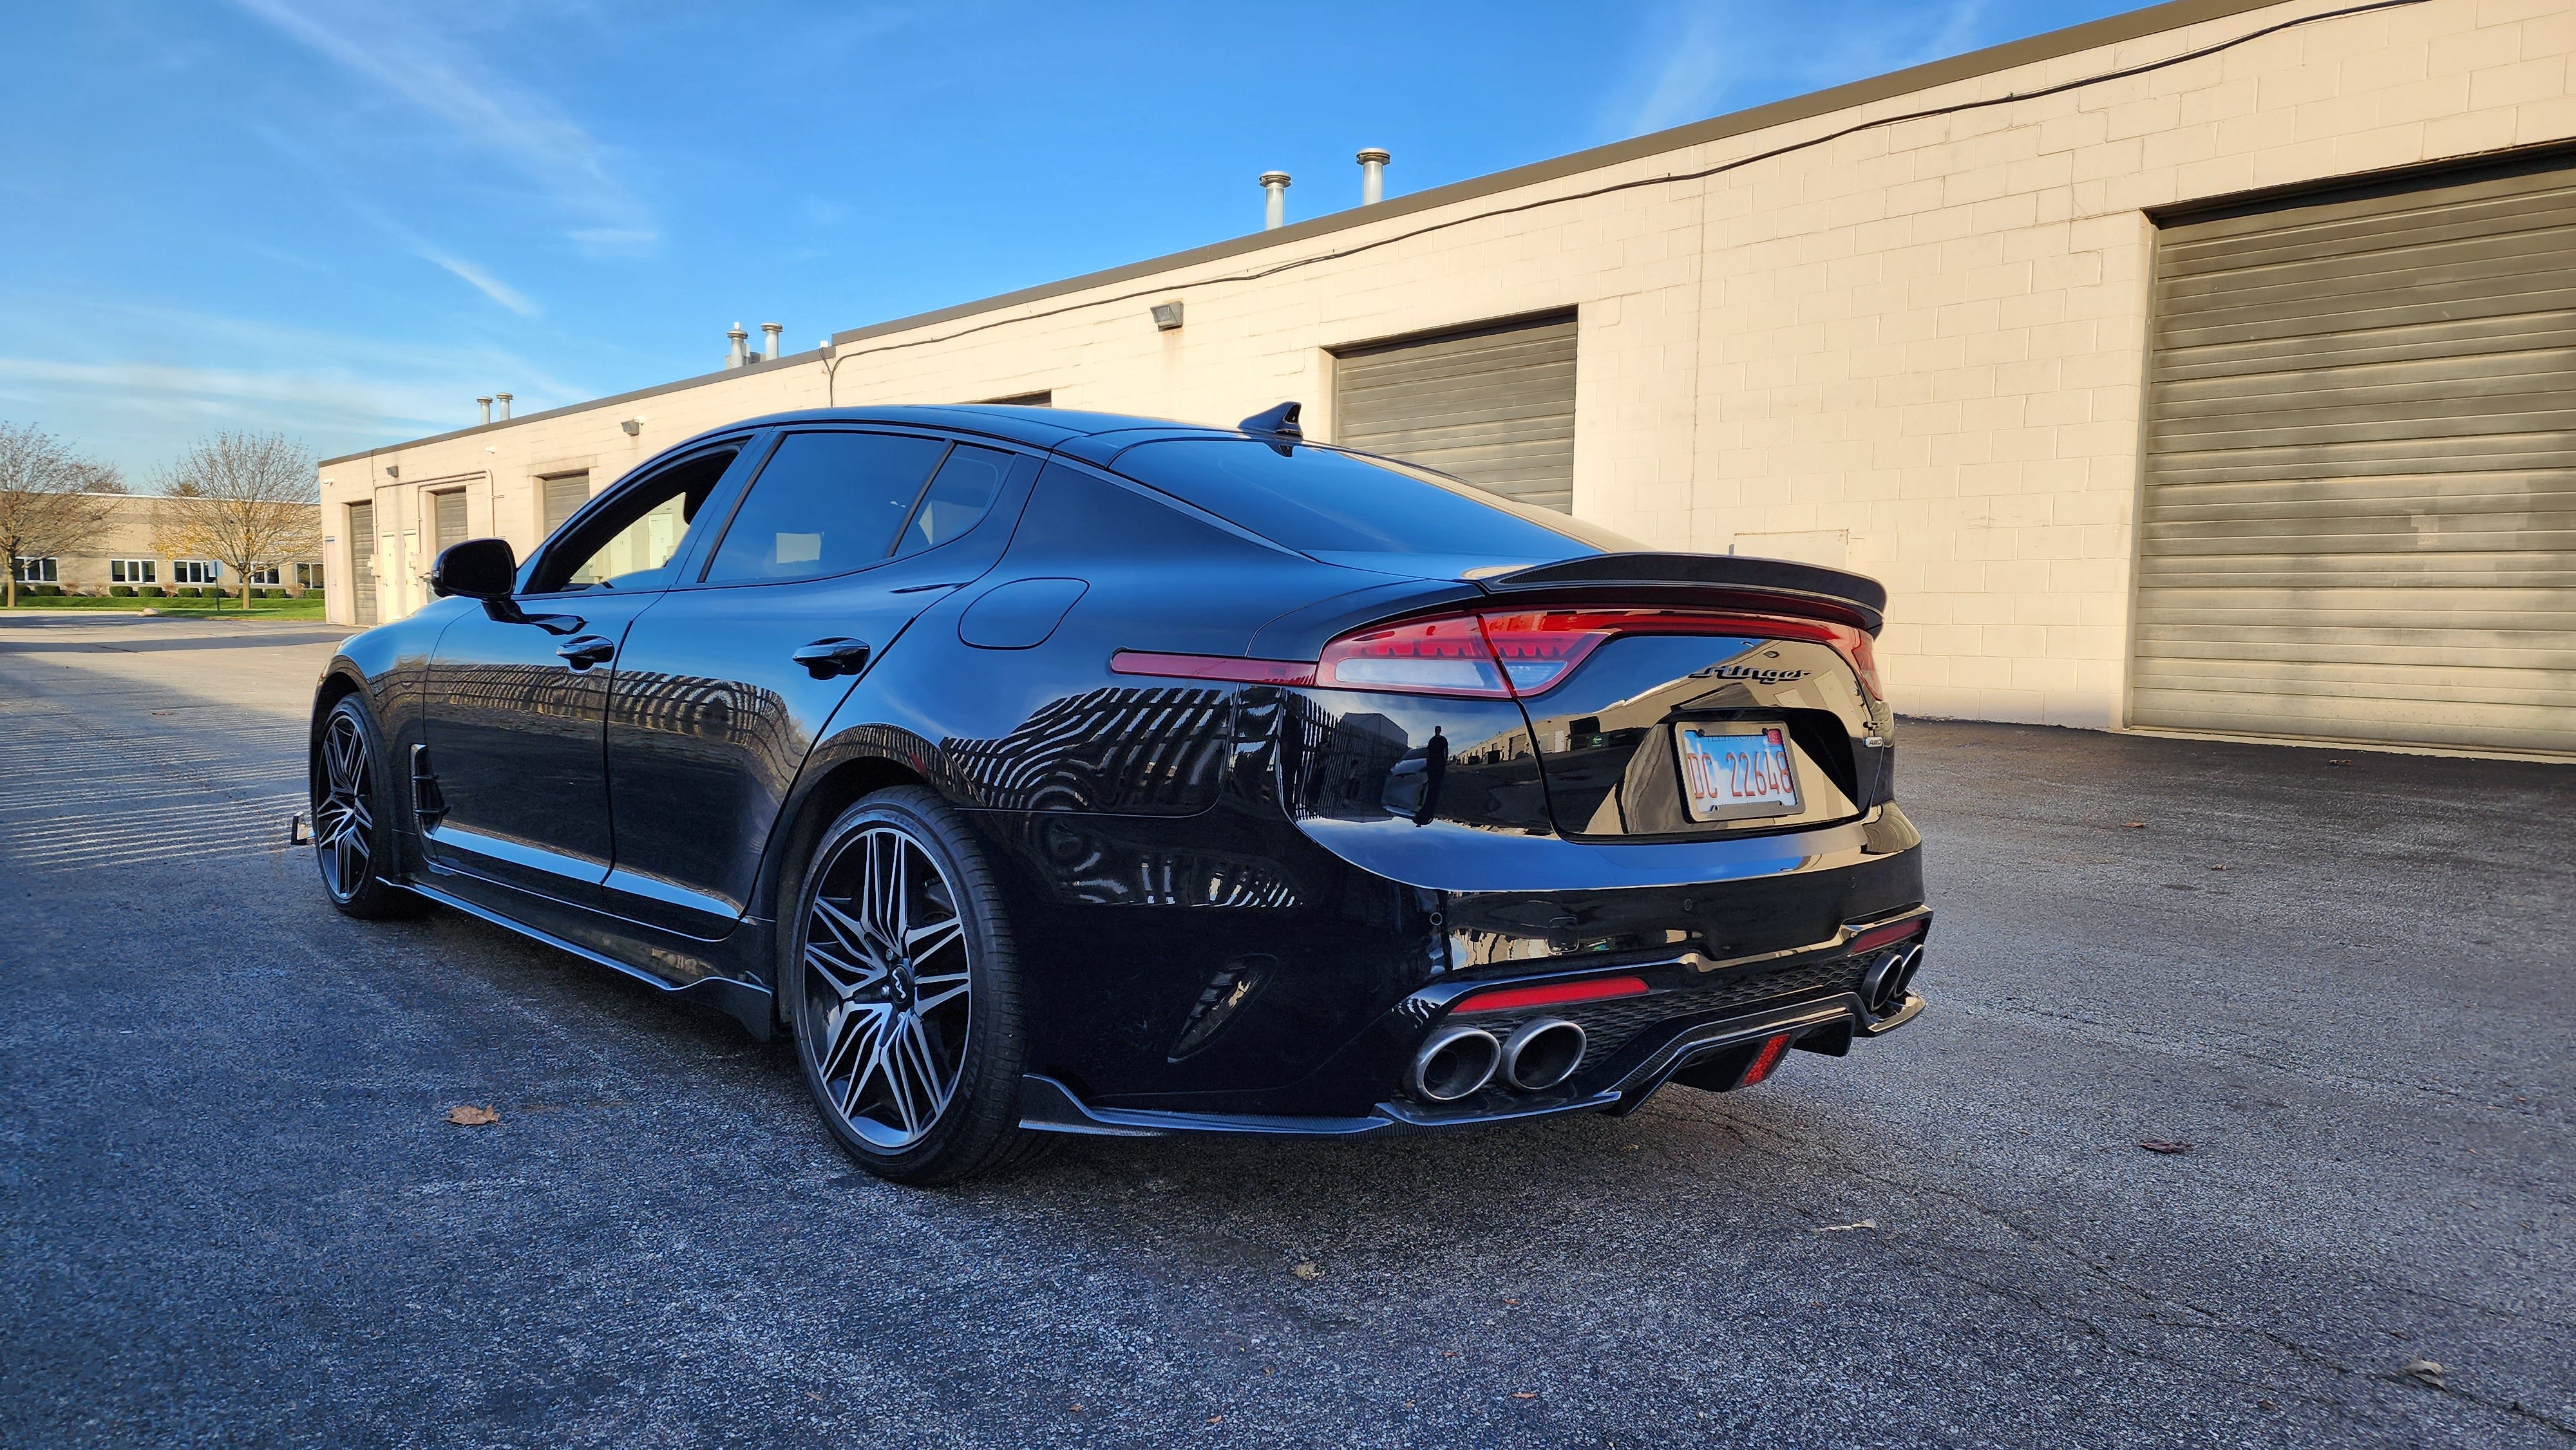 Overall rear shot of the KIA STINGER featuring the 2022' Carbon Fiber Diffuser, capturing the enhanced aggressive stance and styling.